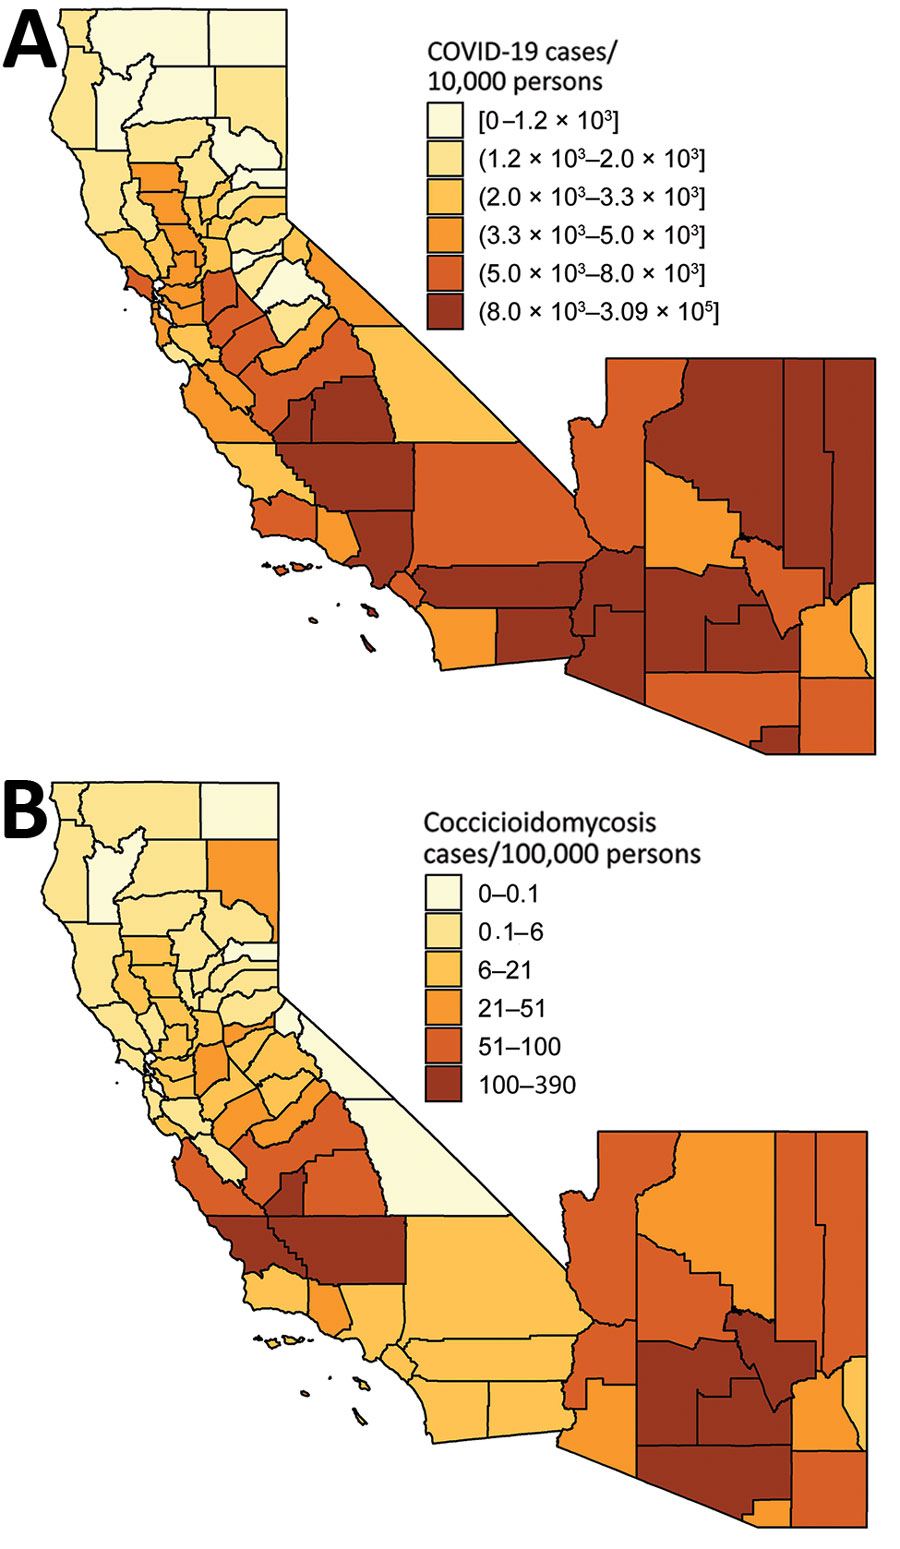 County-level incidence of (A) coronavirus disease (COVID-19) in 2020 and (B) coccidioidomycosis in 2019, California and Arizona. COVID-19 incidence reflects cumulative case count as of August 14, 2020 (5). Coccidioidomycosis incidence reflects annual incidence in 2019 (6,7). Shading indicates levels of incidence. Brackets indicate inclusive bounds; parentheses indicate exclusive bounds.